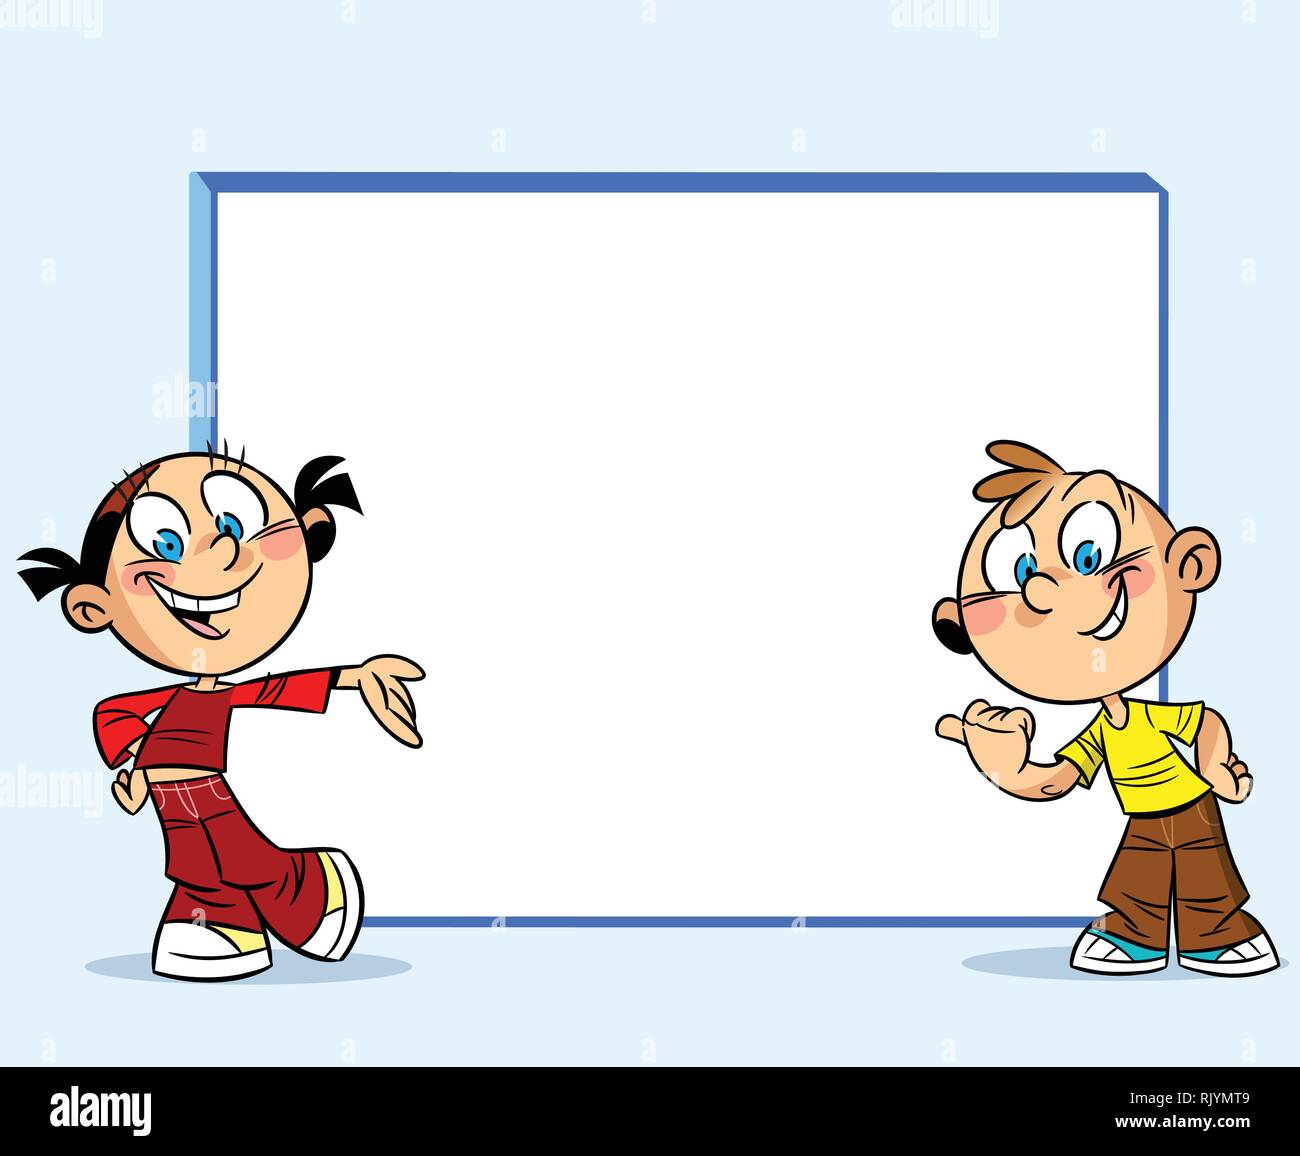 The illustration shows a boy and a girl, standing near a white board. They point a finger on the board. Illustration done in cartoon style, on separat Stock Vector